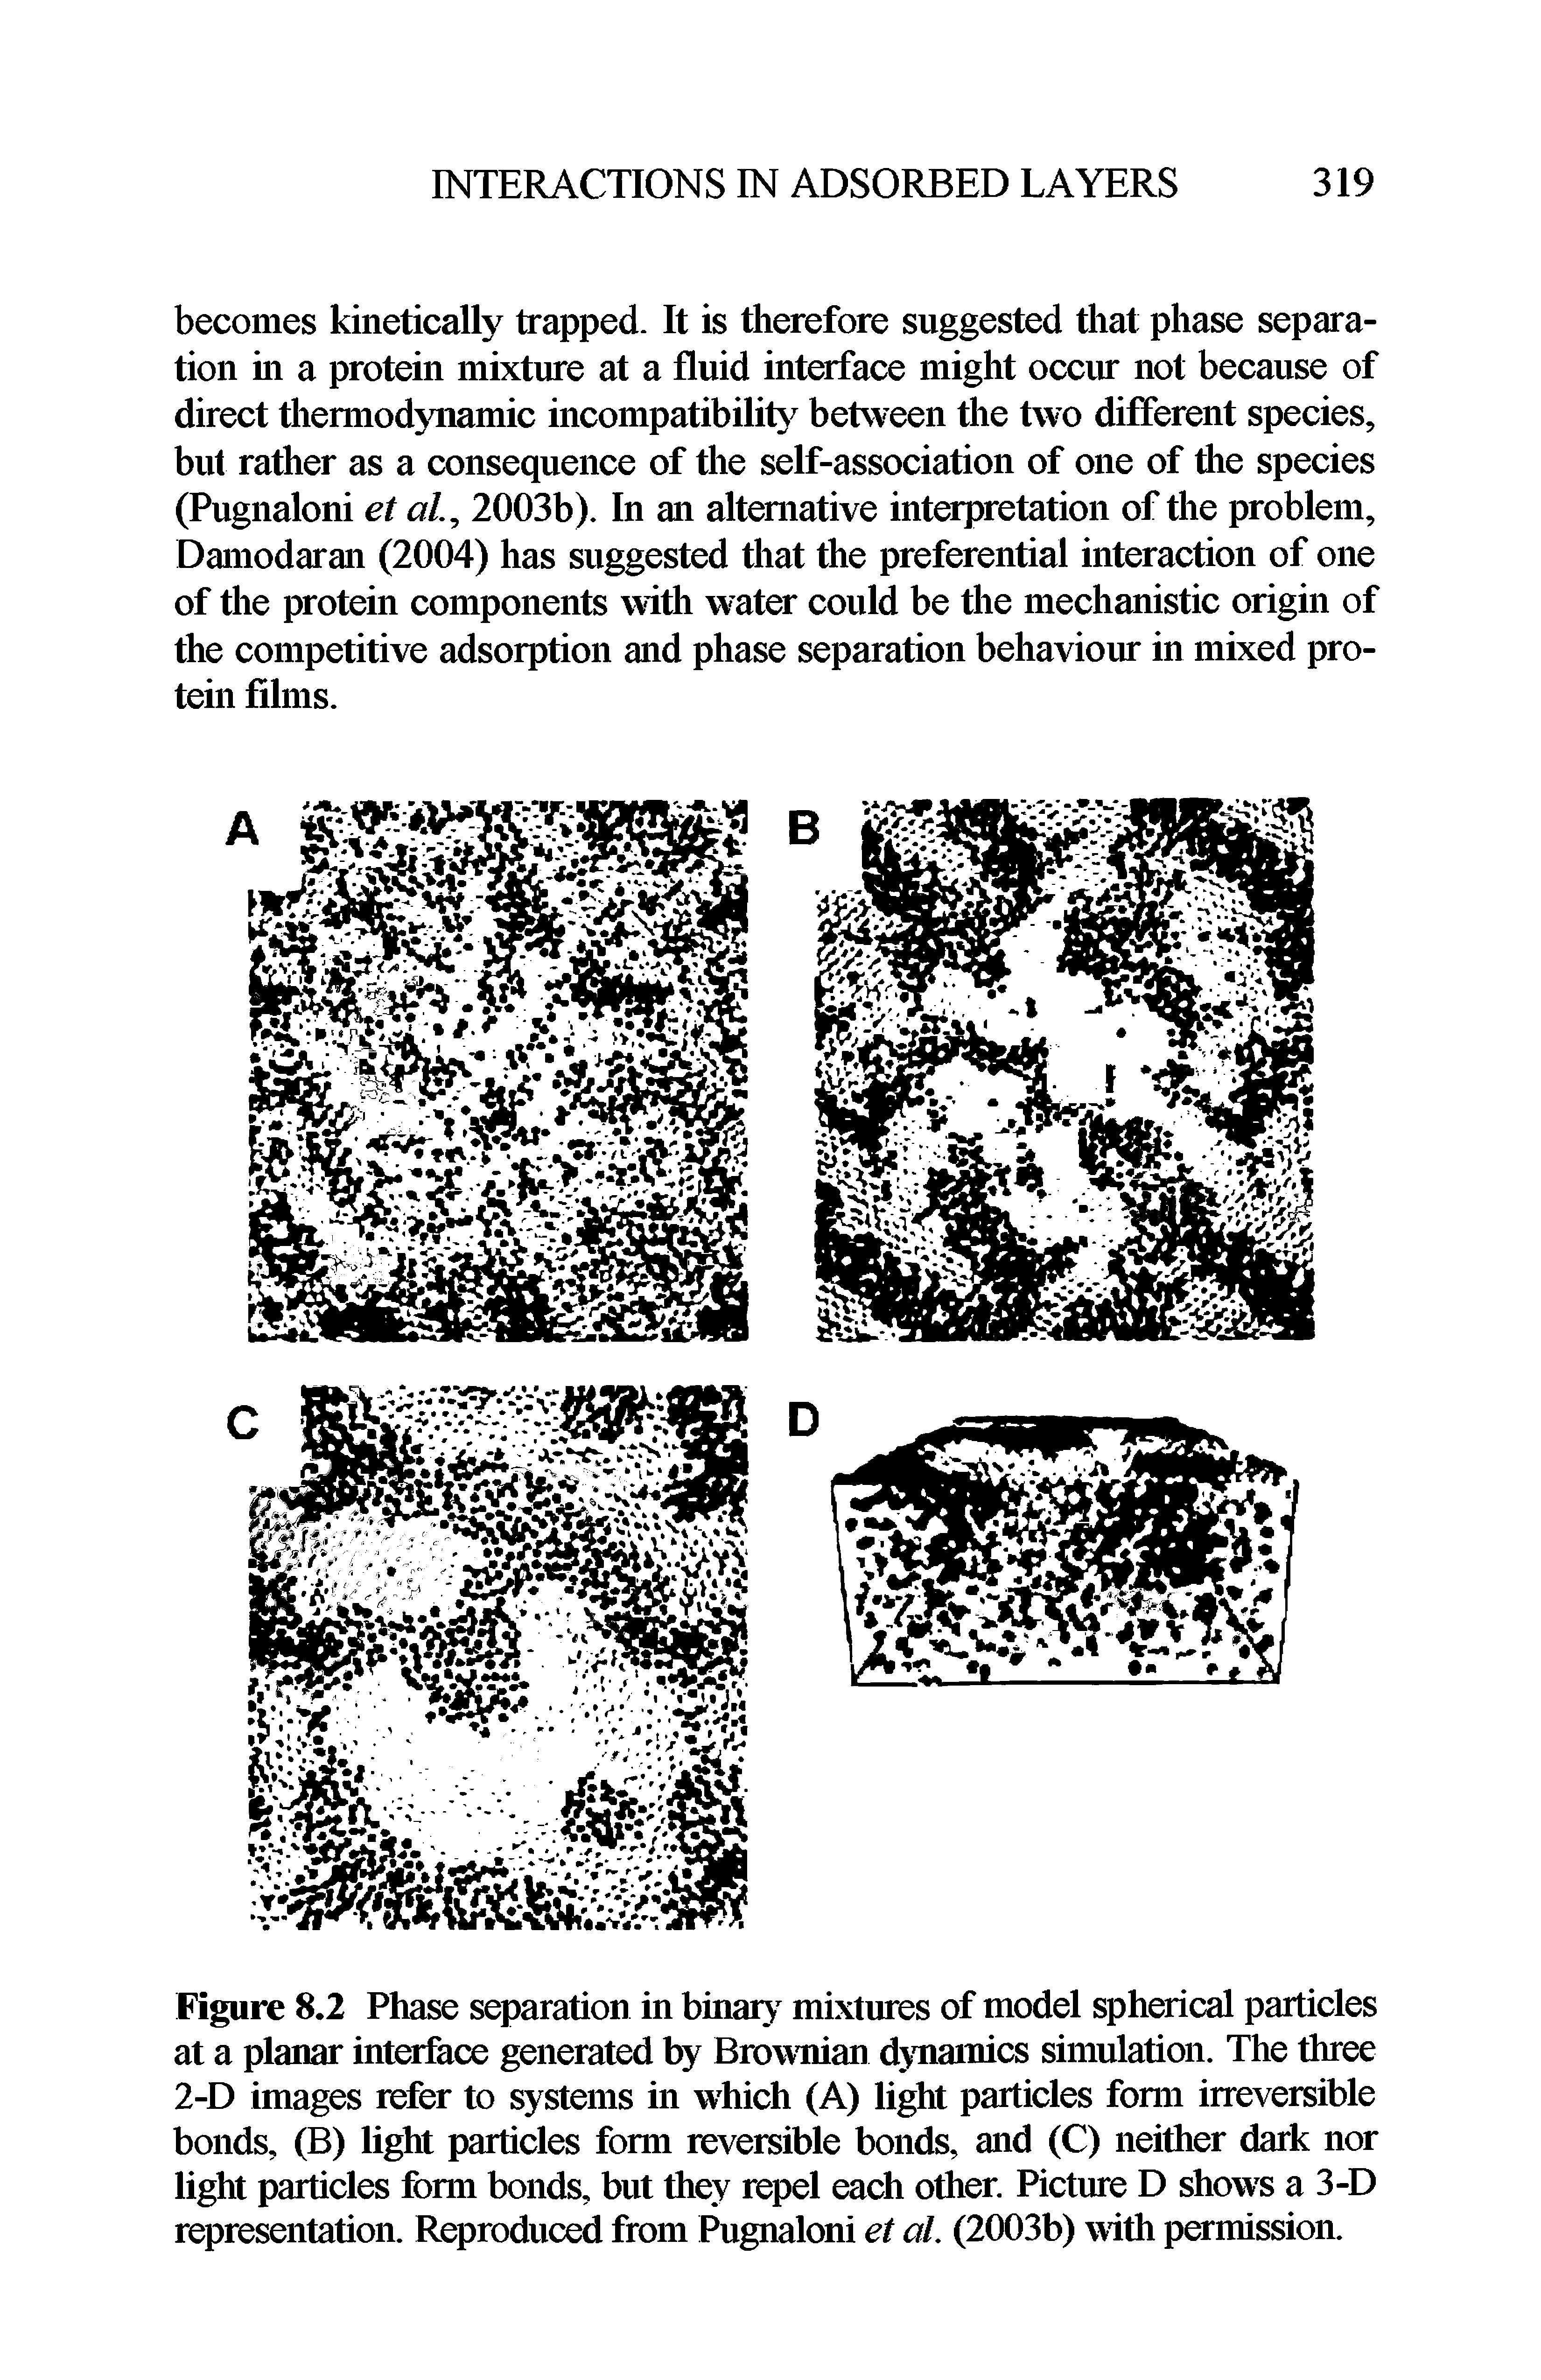 Figure 8.2 Phase separation in binary mixtures of model spherical particles at a planar interface generated by Brownian dynamics simulation. The three 2-D images refer to systems in which (A) light particles form irreversible bonds, (B) light particles form reversible bonds, and (C) neither dark nor light particles form bonds, but they repel each other. Picture D shows a 3-D representation. Reproduced from Pugnaloni et al. (2003b) with permission.